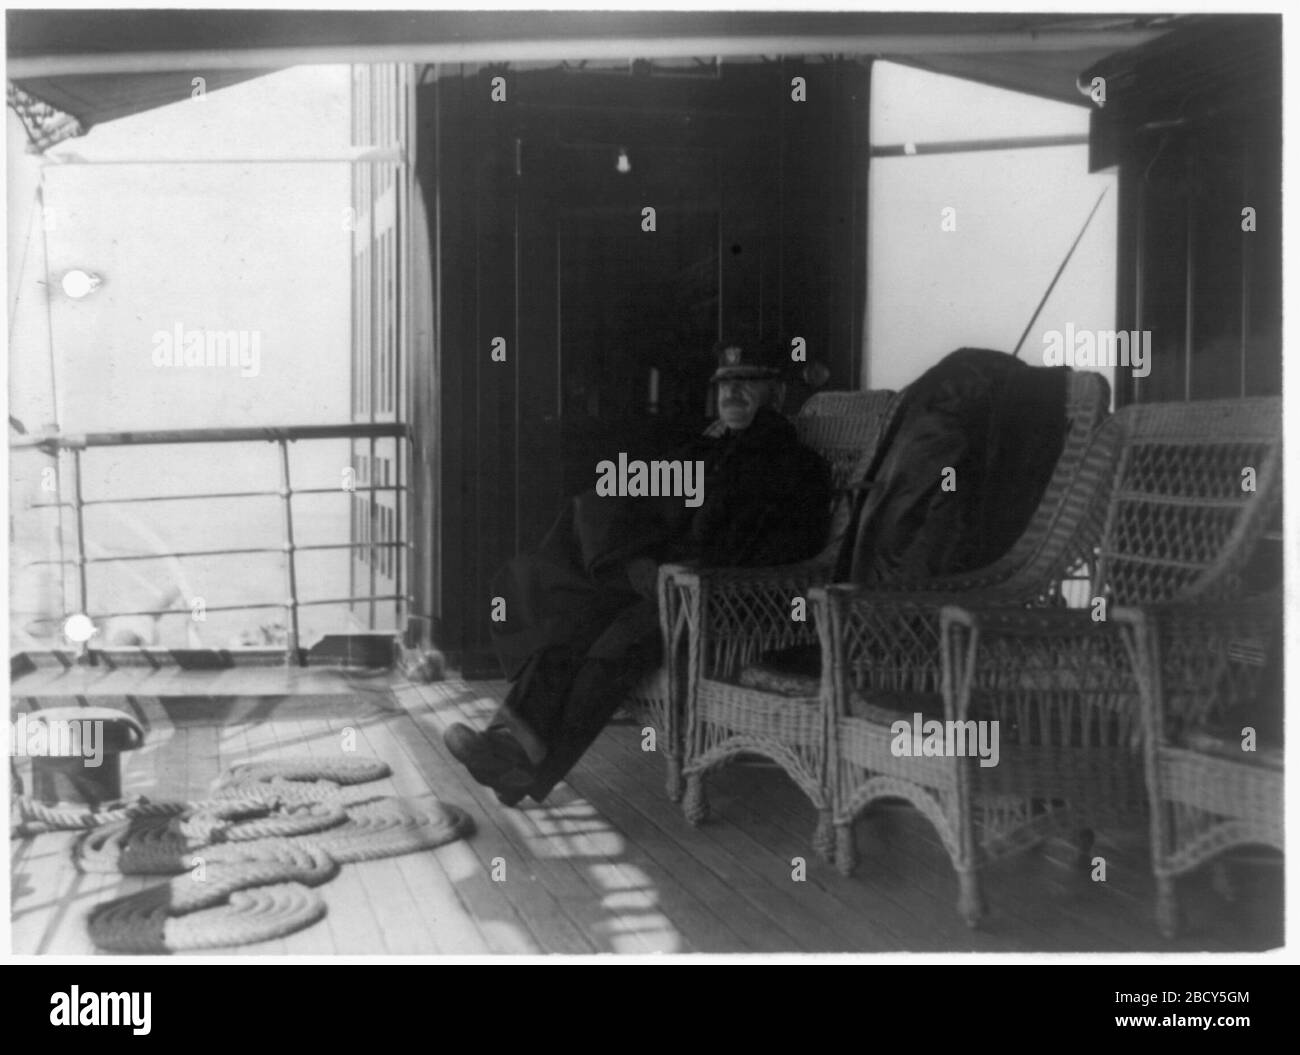 'English: Title: Admiral Robert E. Koontz(?) ... on the President's yacht Mayflower today. In the background ... is shown the elevator ... on the yacht Abstract/medium: 1 photographic print.; 1909; Library of Congress  Catalog: https://lccn.loc.gov/89711955 Image download: https://cdn.loc.gov/service/pnp/cph/3b40000/3b43000/3b43500/3b43542r.jpg Original url: https://www.loc.gov/pictures/item/89711955/; National Photo Company Collection; ' Stock Photo